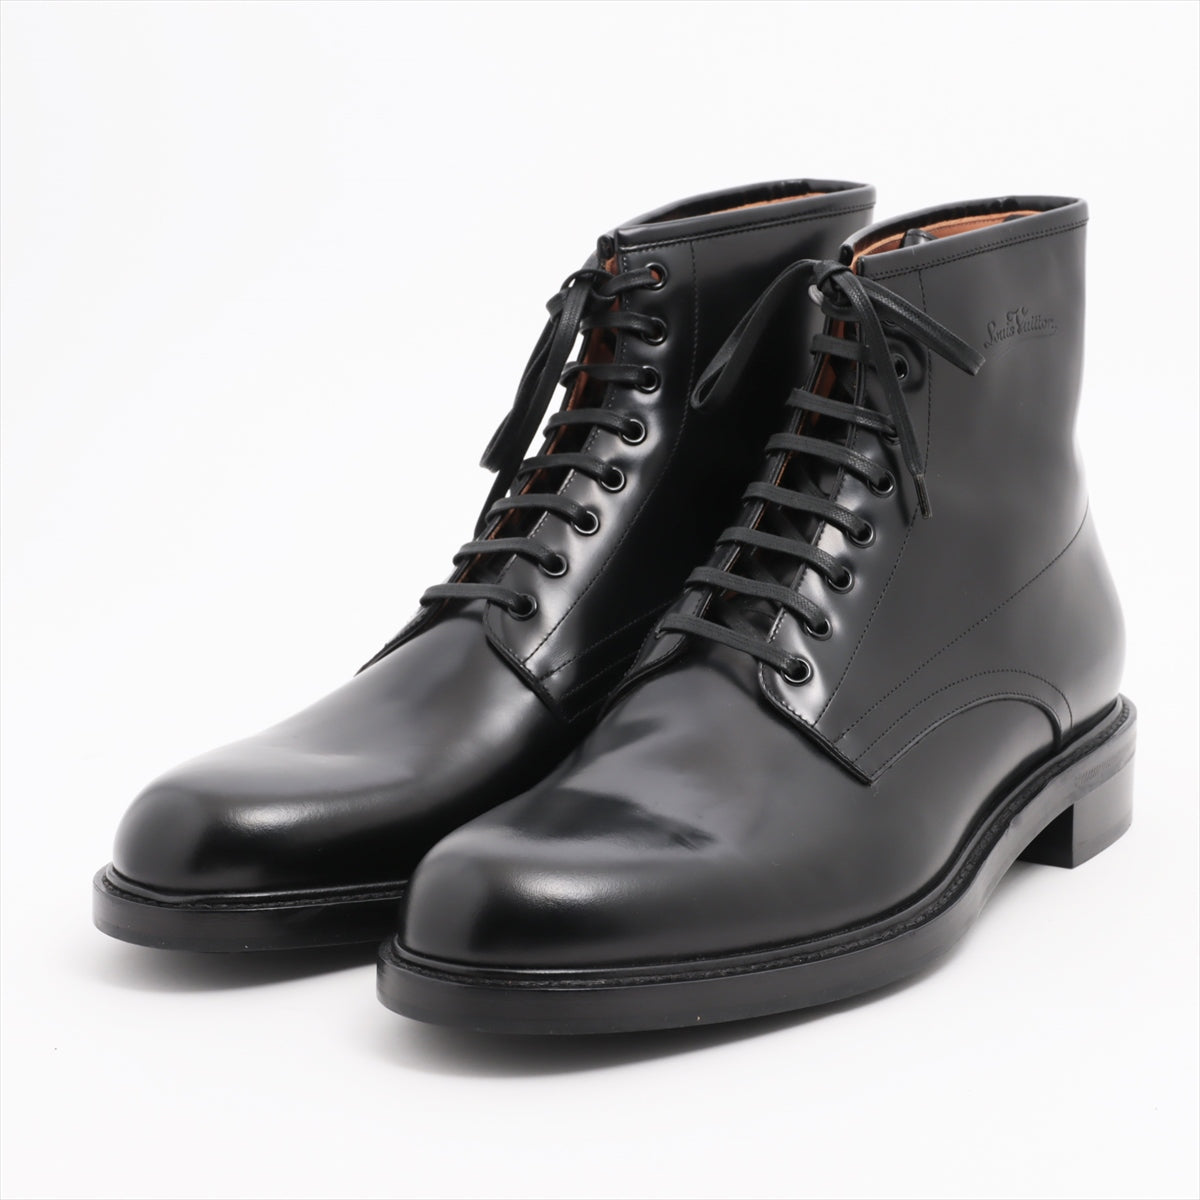 Louis Vuitton 16 years Leather Boots 9 1/2M Men's Black DI1106 Replacement Laces Included